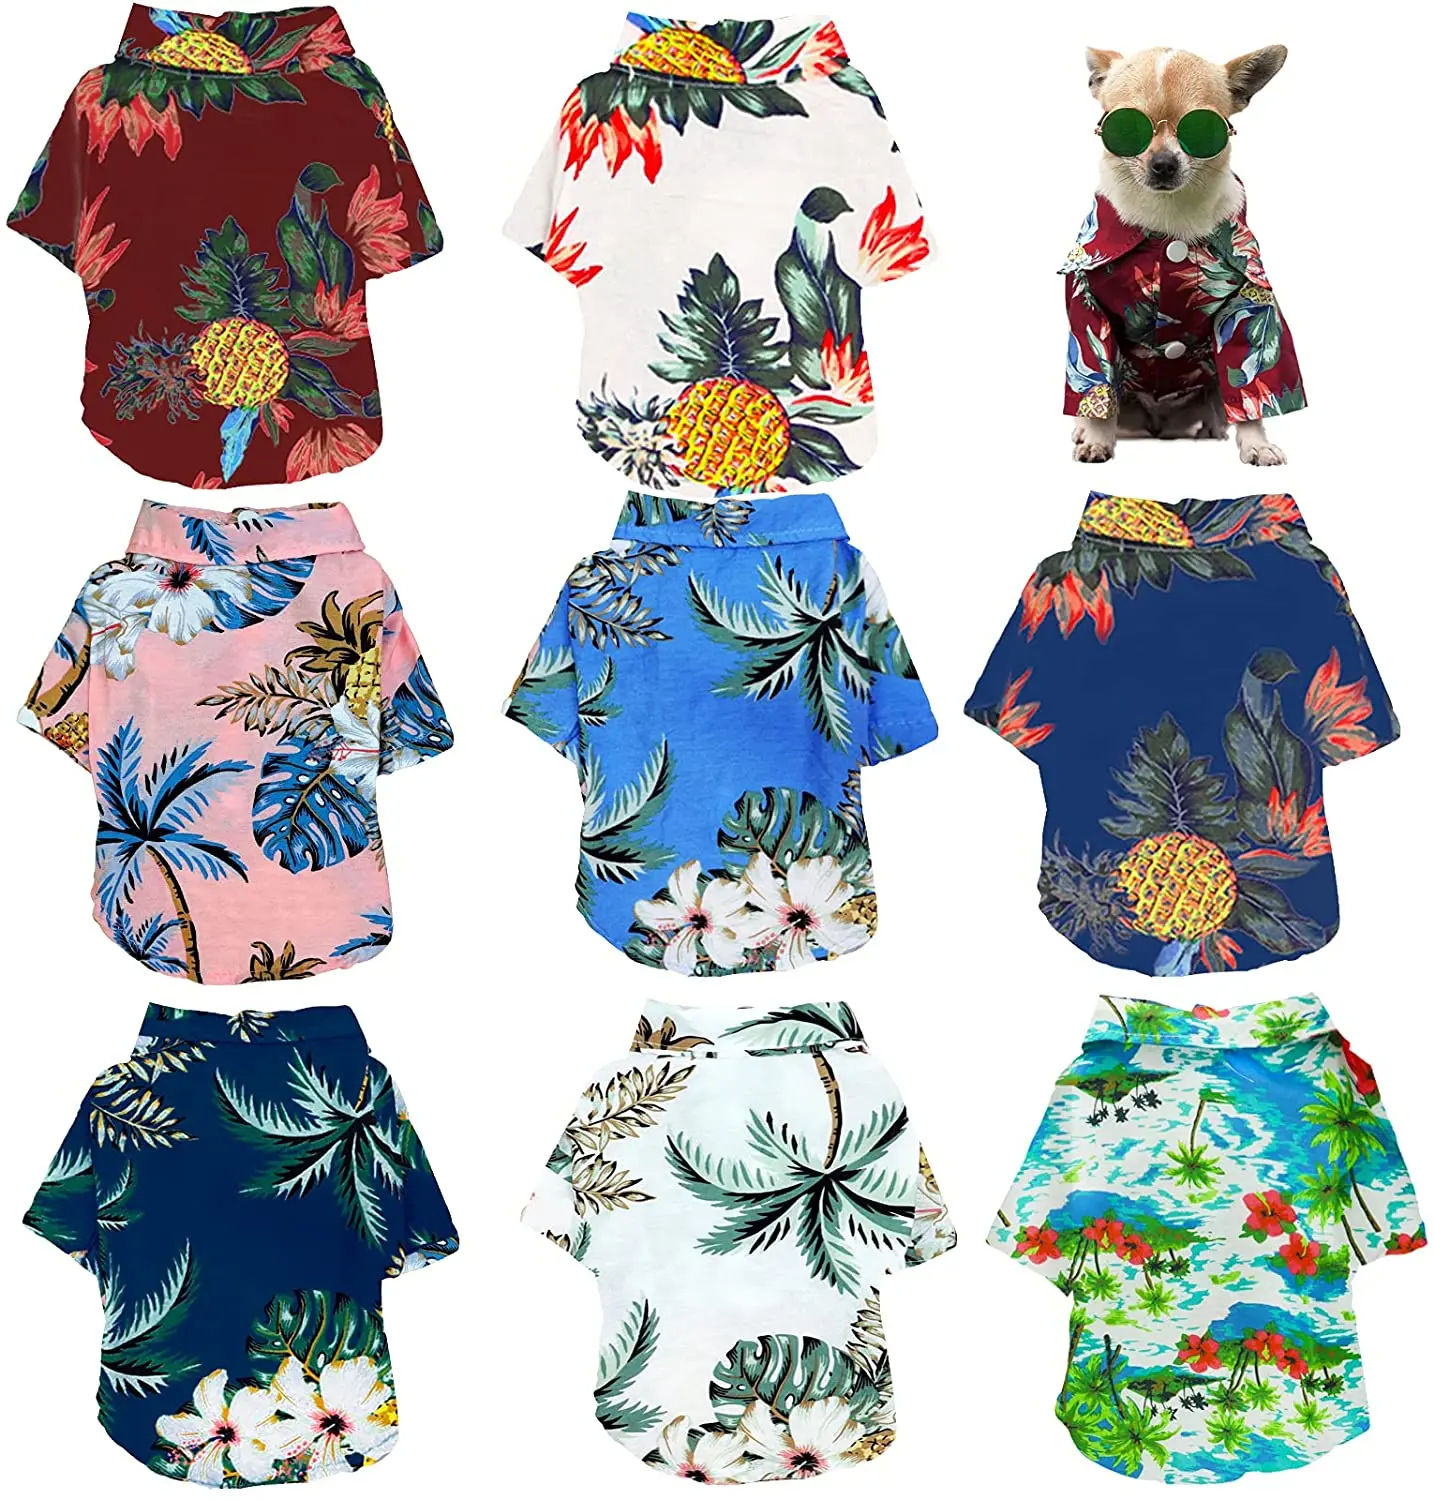 Summer-Pet-Printed-Clothes-For-Dogs-Floral-Beach-Shirt-Jackets-Dog-Coat-Puppy-Costume-Cat-Spring.jpg